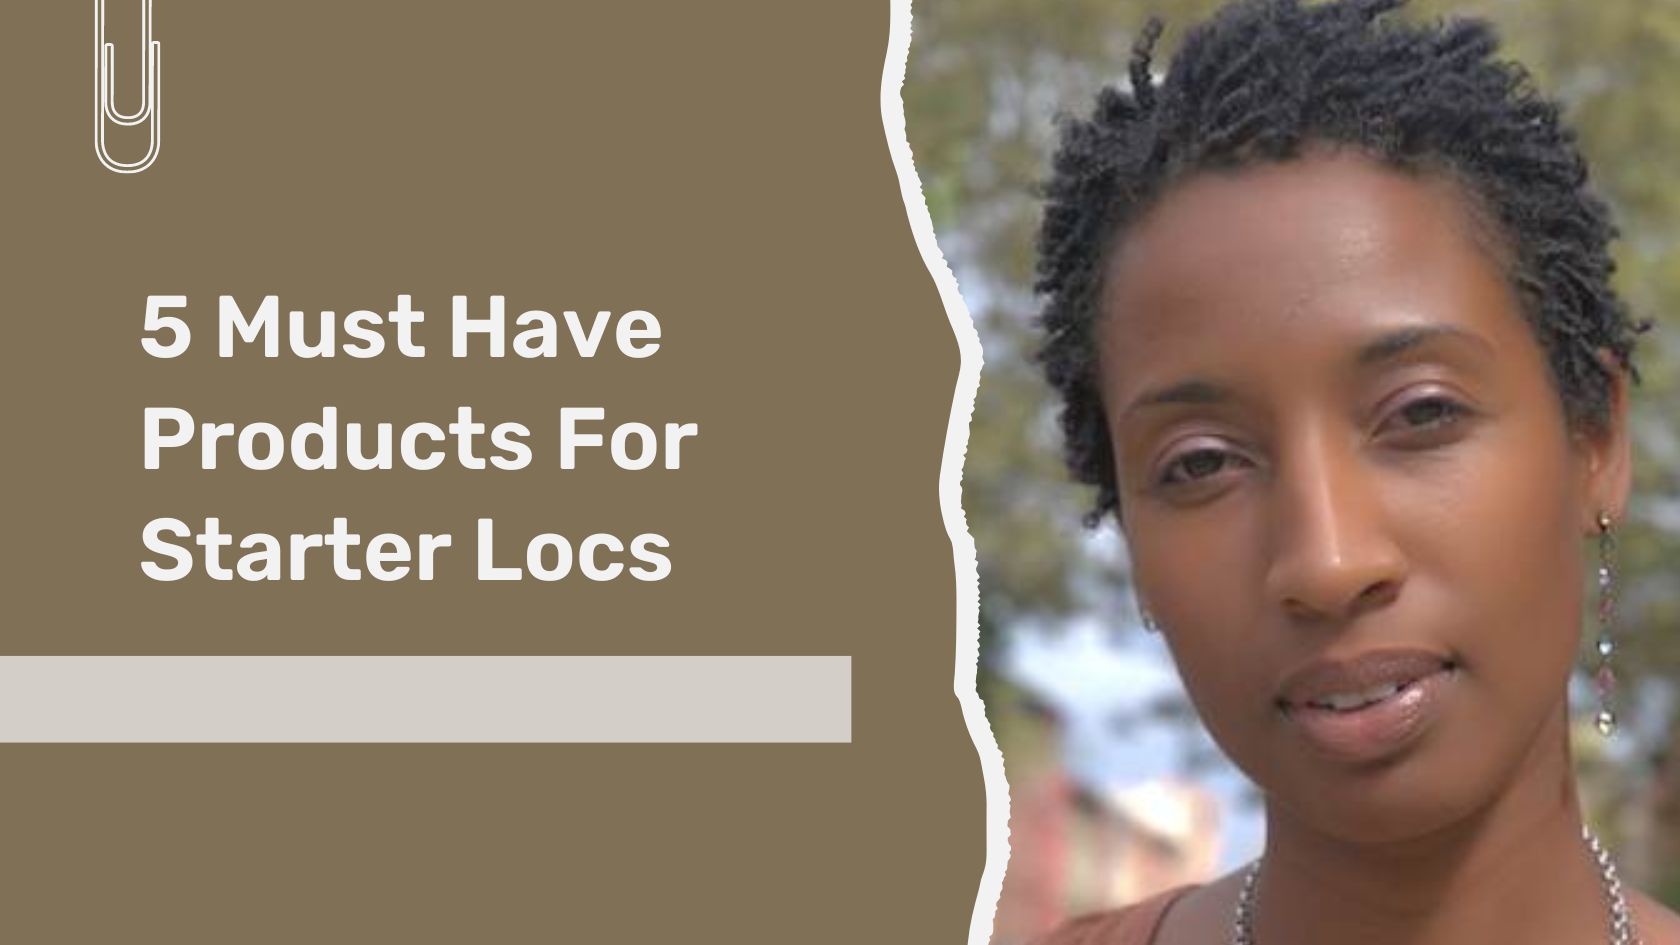 5 must have Products You Need For Starter Locs